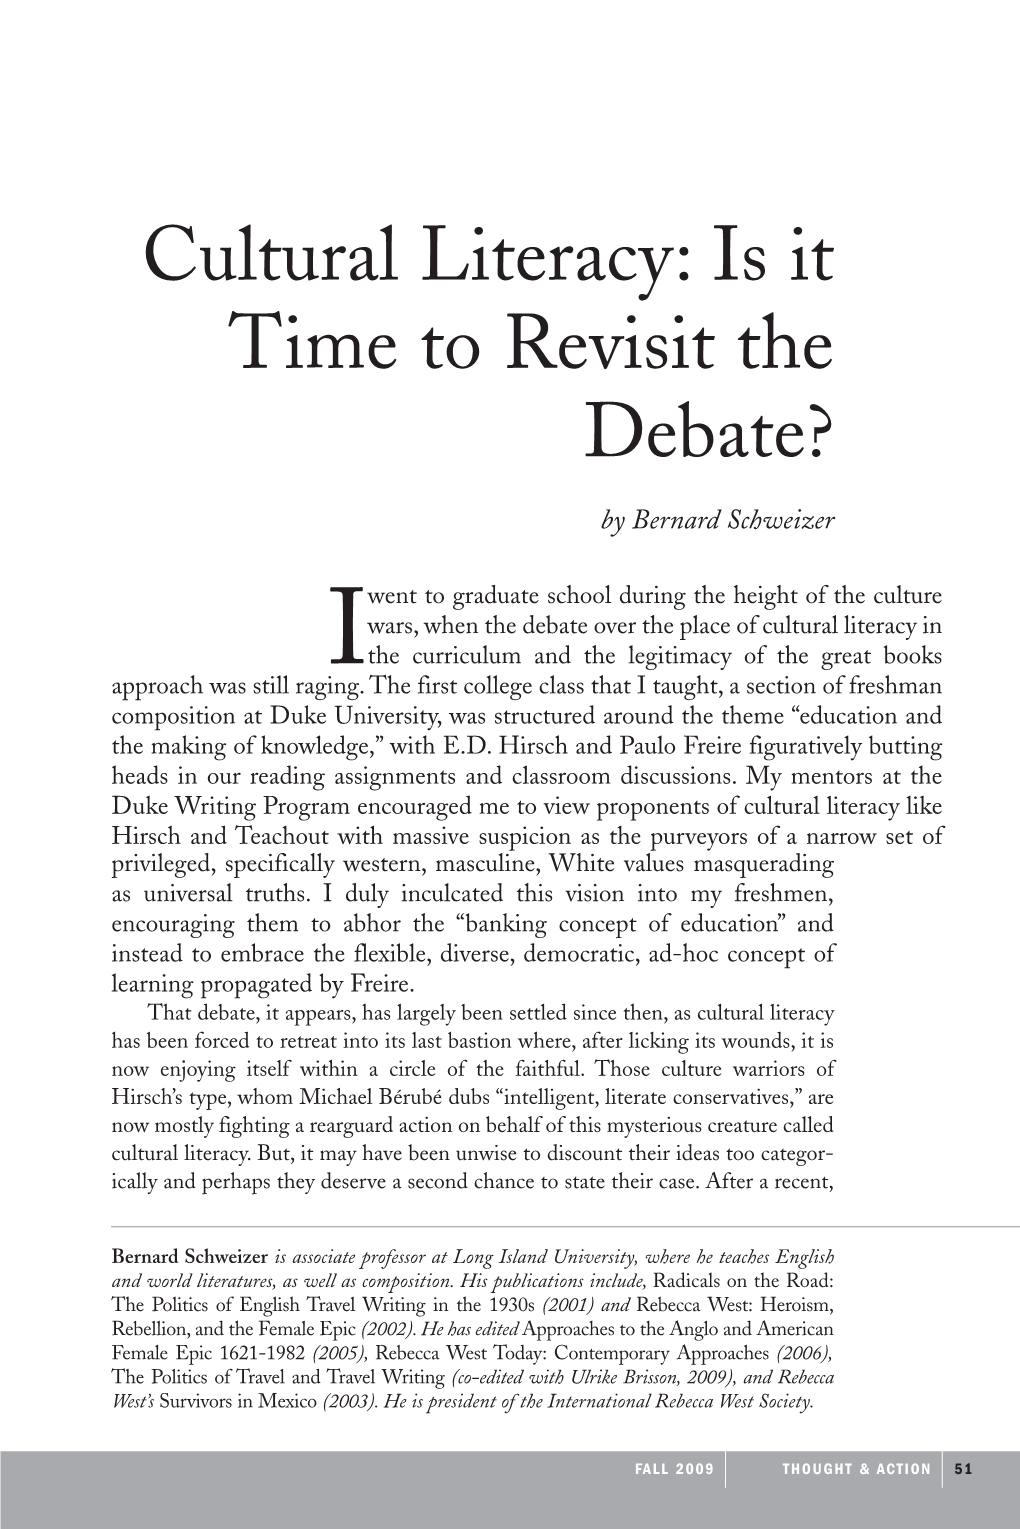 Cultural Literacy: Is It Time to Revisit the Debate?